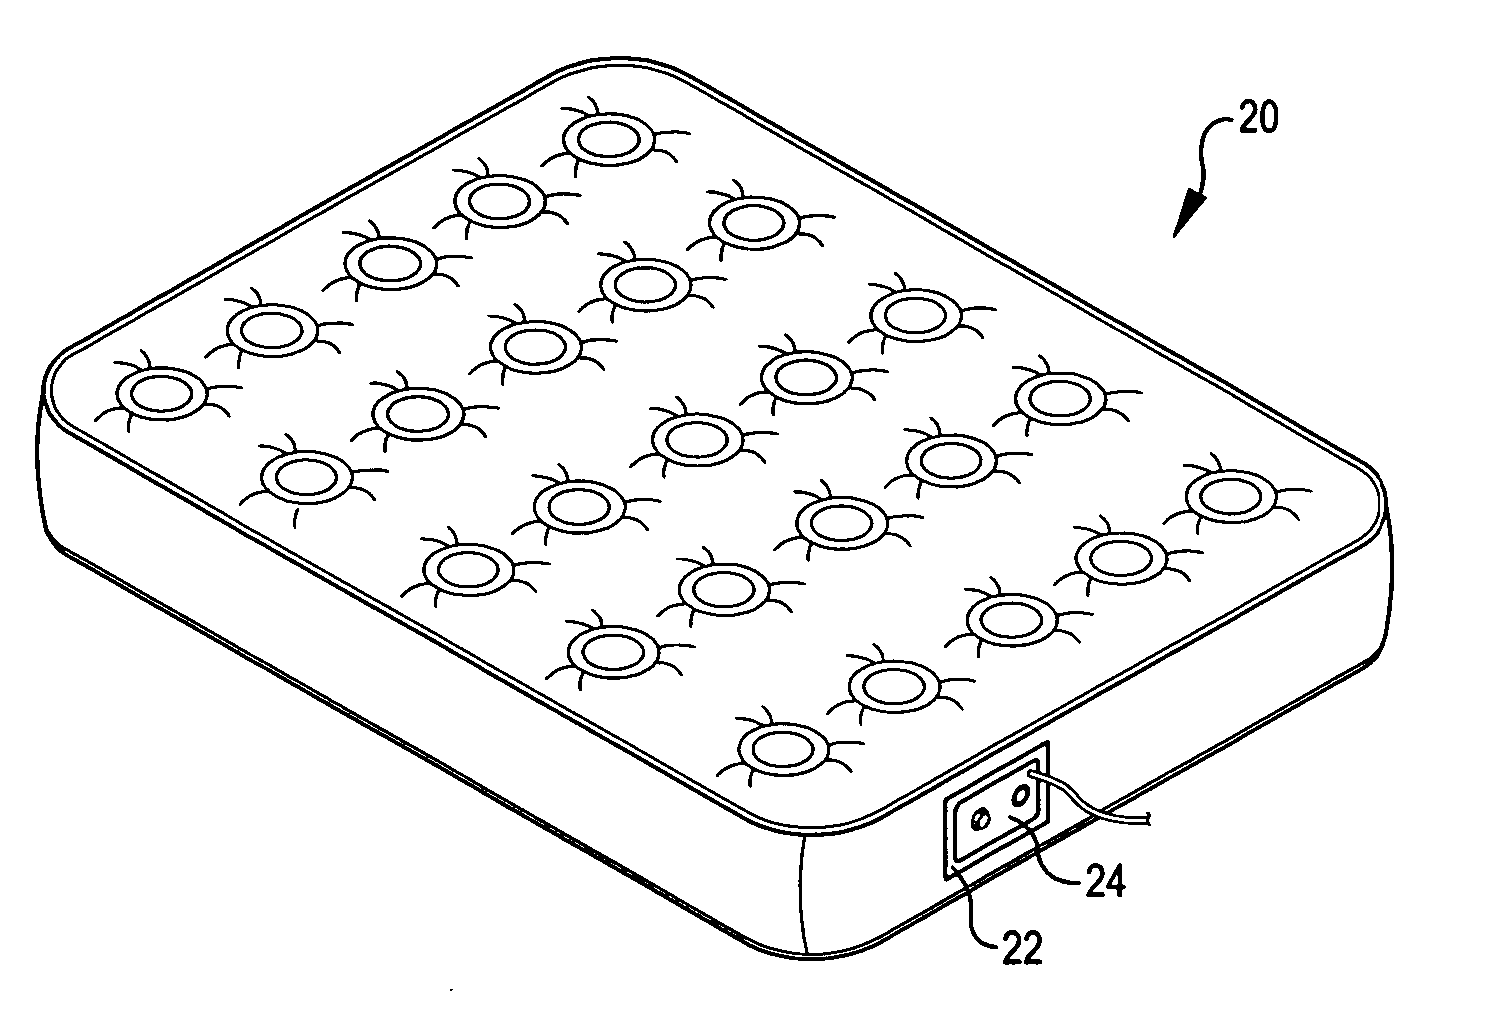 Airbed with built-in pump having powered inflation and deflation